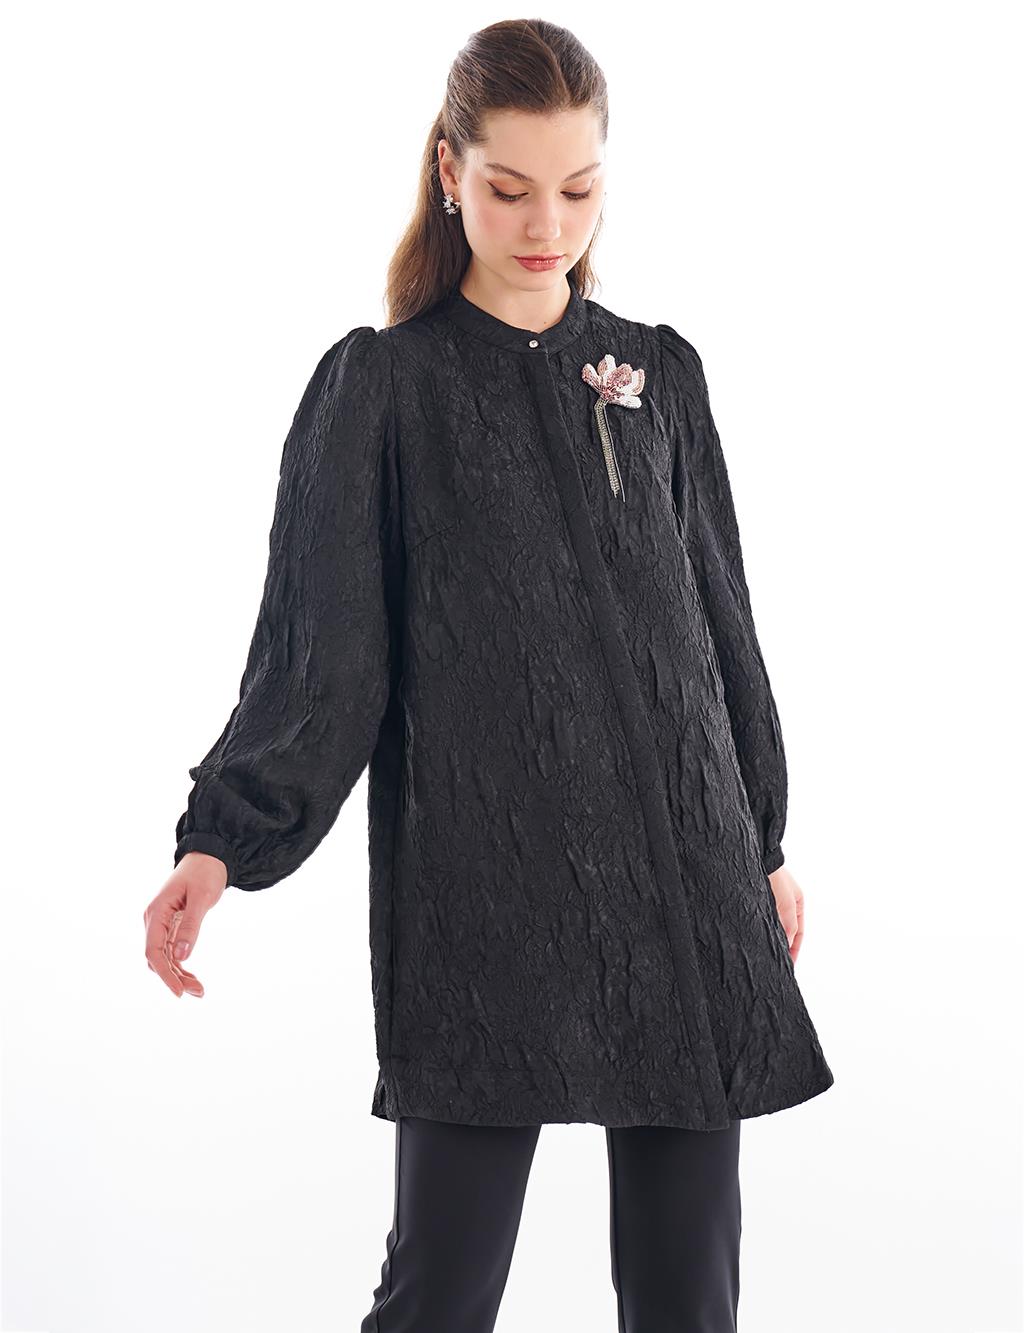 Relief Patterned Crew Neck Tunic Black